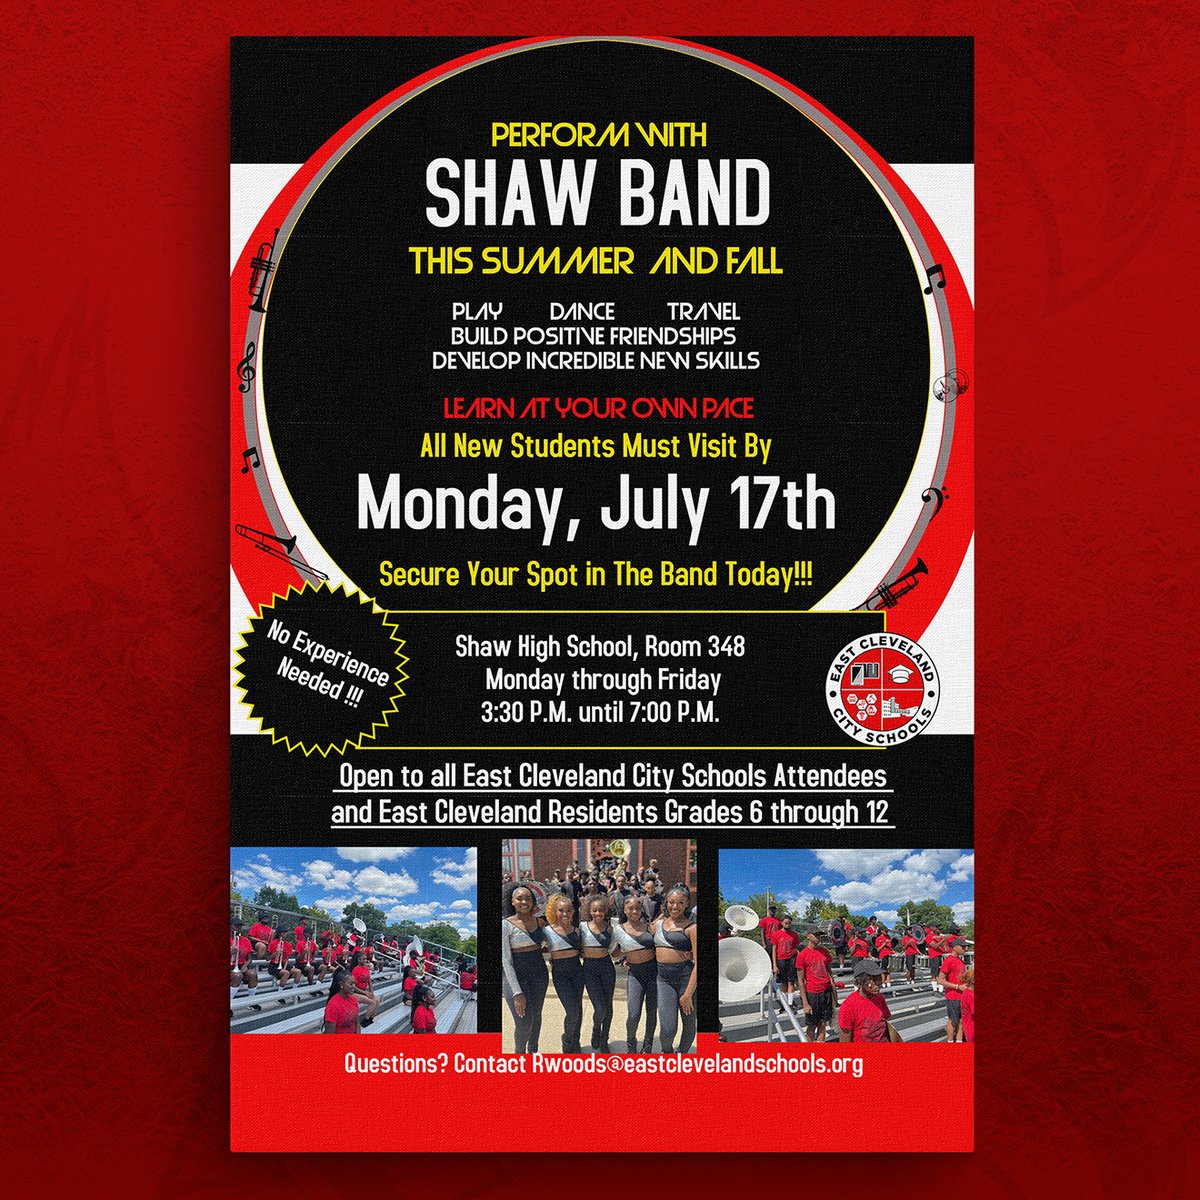 Perform with the Shaw High School Mighty Marching Cardinal Band this summer! All new students must visit by Monday, July 17th! NO EXPERIENCE NEEDED! Open to all East Cleveland Students grades 6-12! Contact rwoods@eastclevelandschools.org for more information.